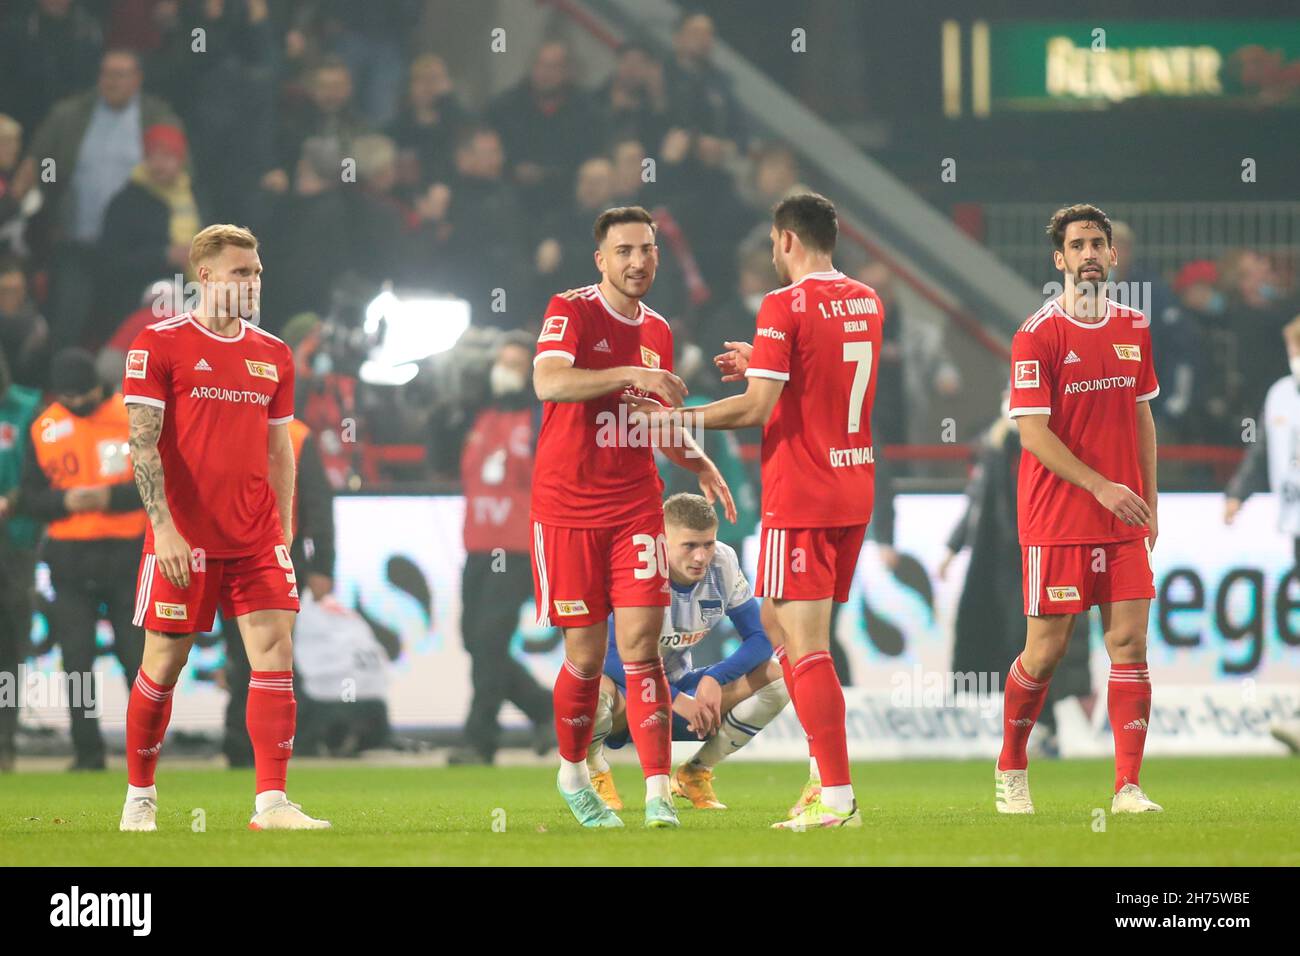 20 November 2021, Berlin: Football: Bundesliga, 1. FC Union Berlin - Hertha BSC, Matchday 12, at the stadium 'An der Alten Försterei'. Union Berlin's Andreas Voglsammer (l-r), Union Berlin's Kevin Möhwald, Union Berlin's Levin Öztunali and Union Berlin's Rani Khedira cheer after the match. IMPORTANT NOTE: In accordance with the regulations of the DFL Deutsche Fußball Liga and the DFB Deutscher Fußball-Bund, it is prohibited to use or have used photographs taken in the stadium and/or of the match in the form of sequence pictures and/or video-like photo series. Photo: Andreas Gora/dpa Stock Photo